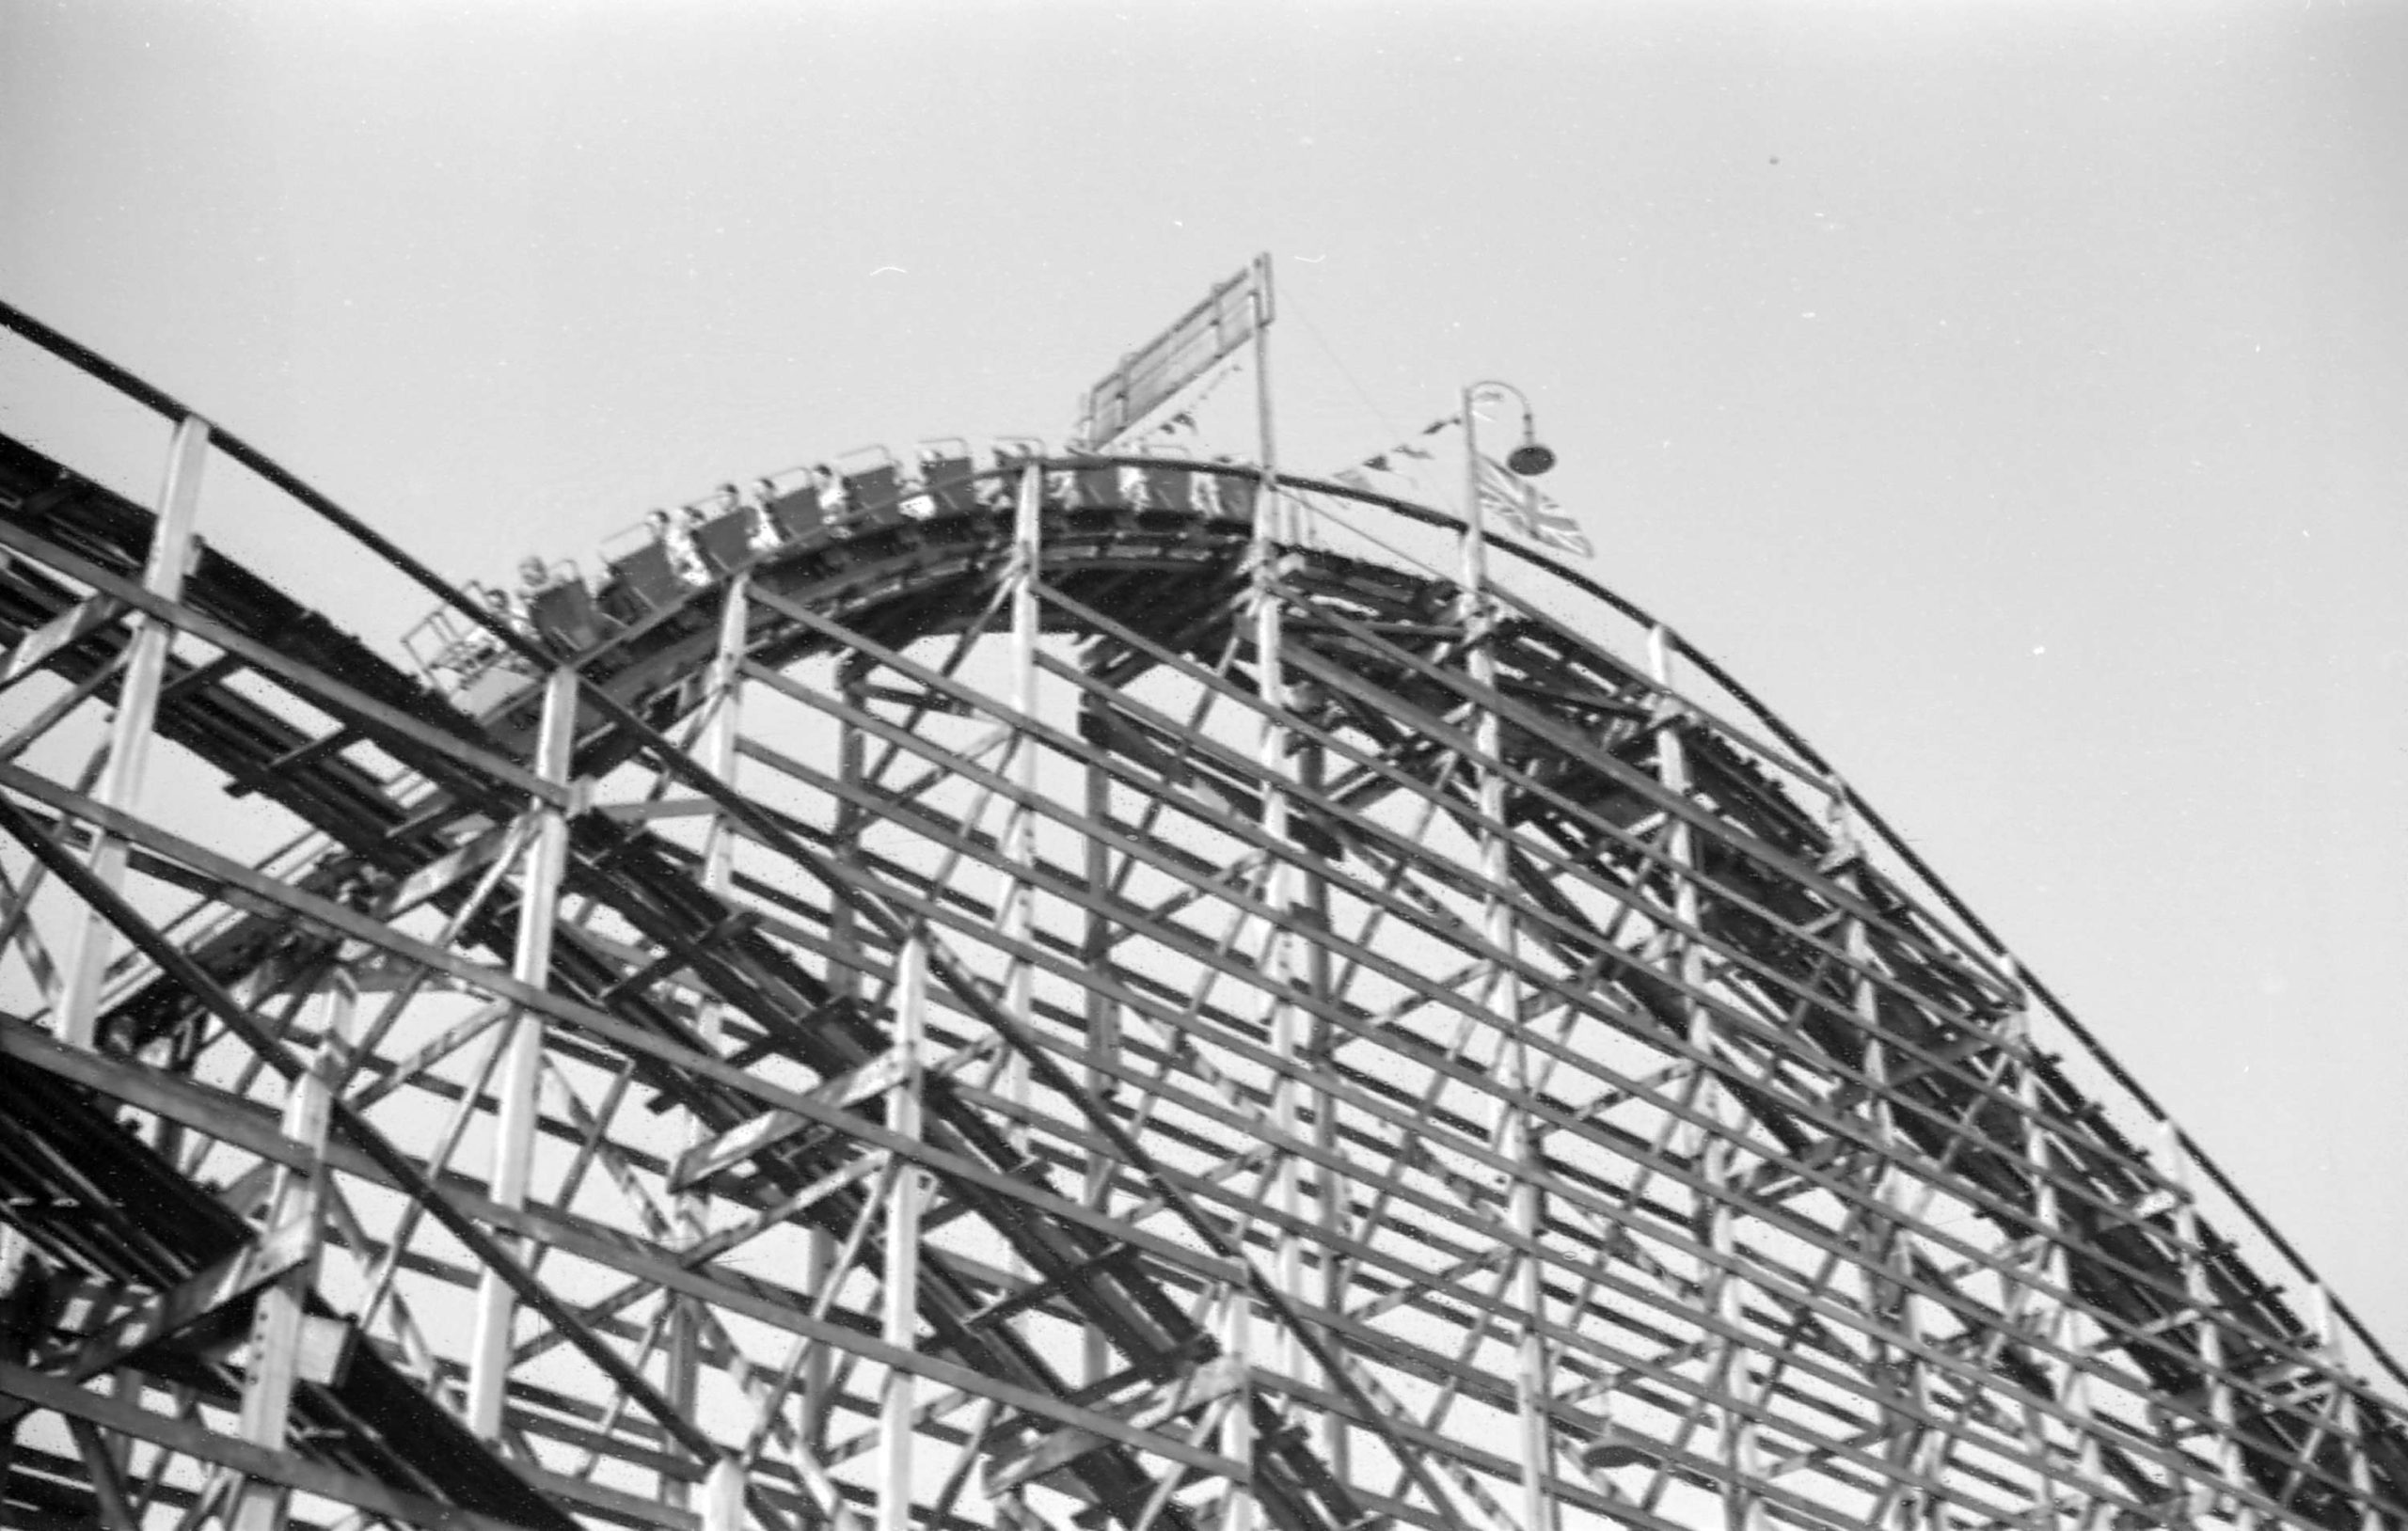 Cars at the top of the Giant Dipper roller coaster at the Pacific National Exhibition midway. James Crookall, photographer. Reference code: AM640-S1-: CVA 260-500